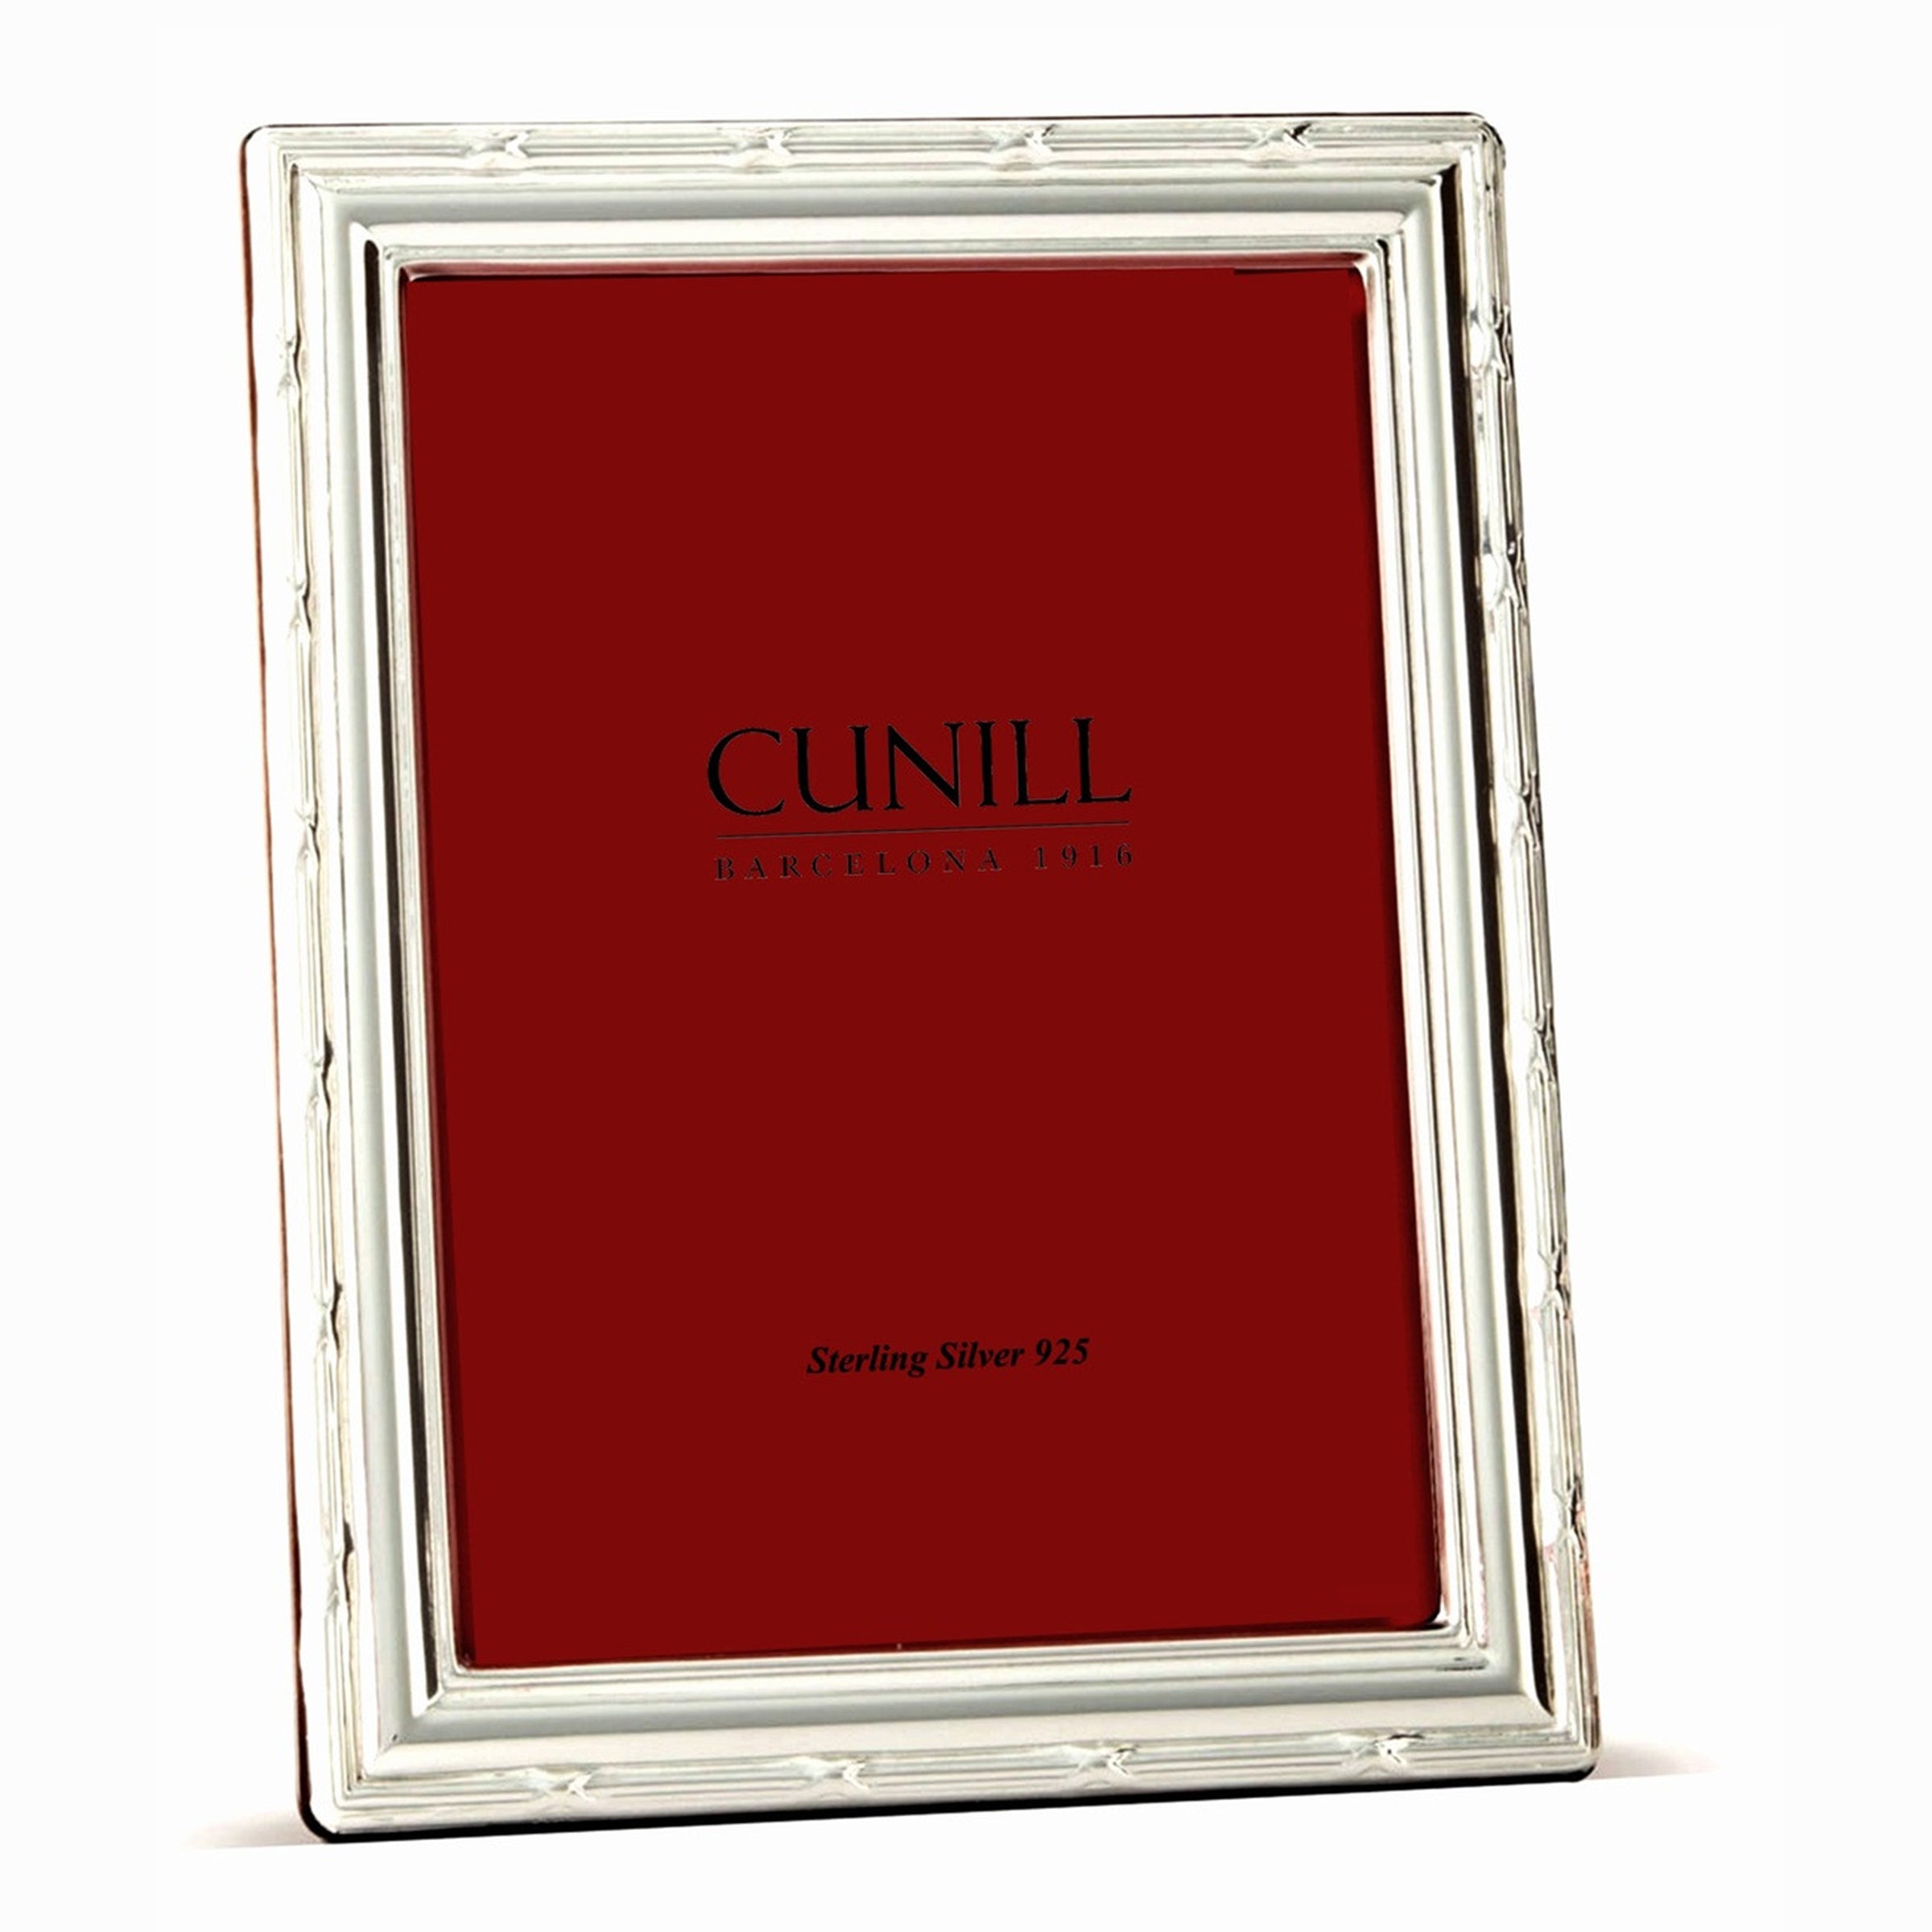 Cunill Ribbon Non-Tarnish Sterling Silver Picture Frame